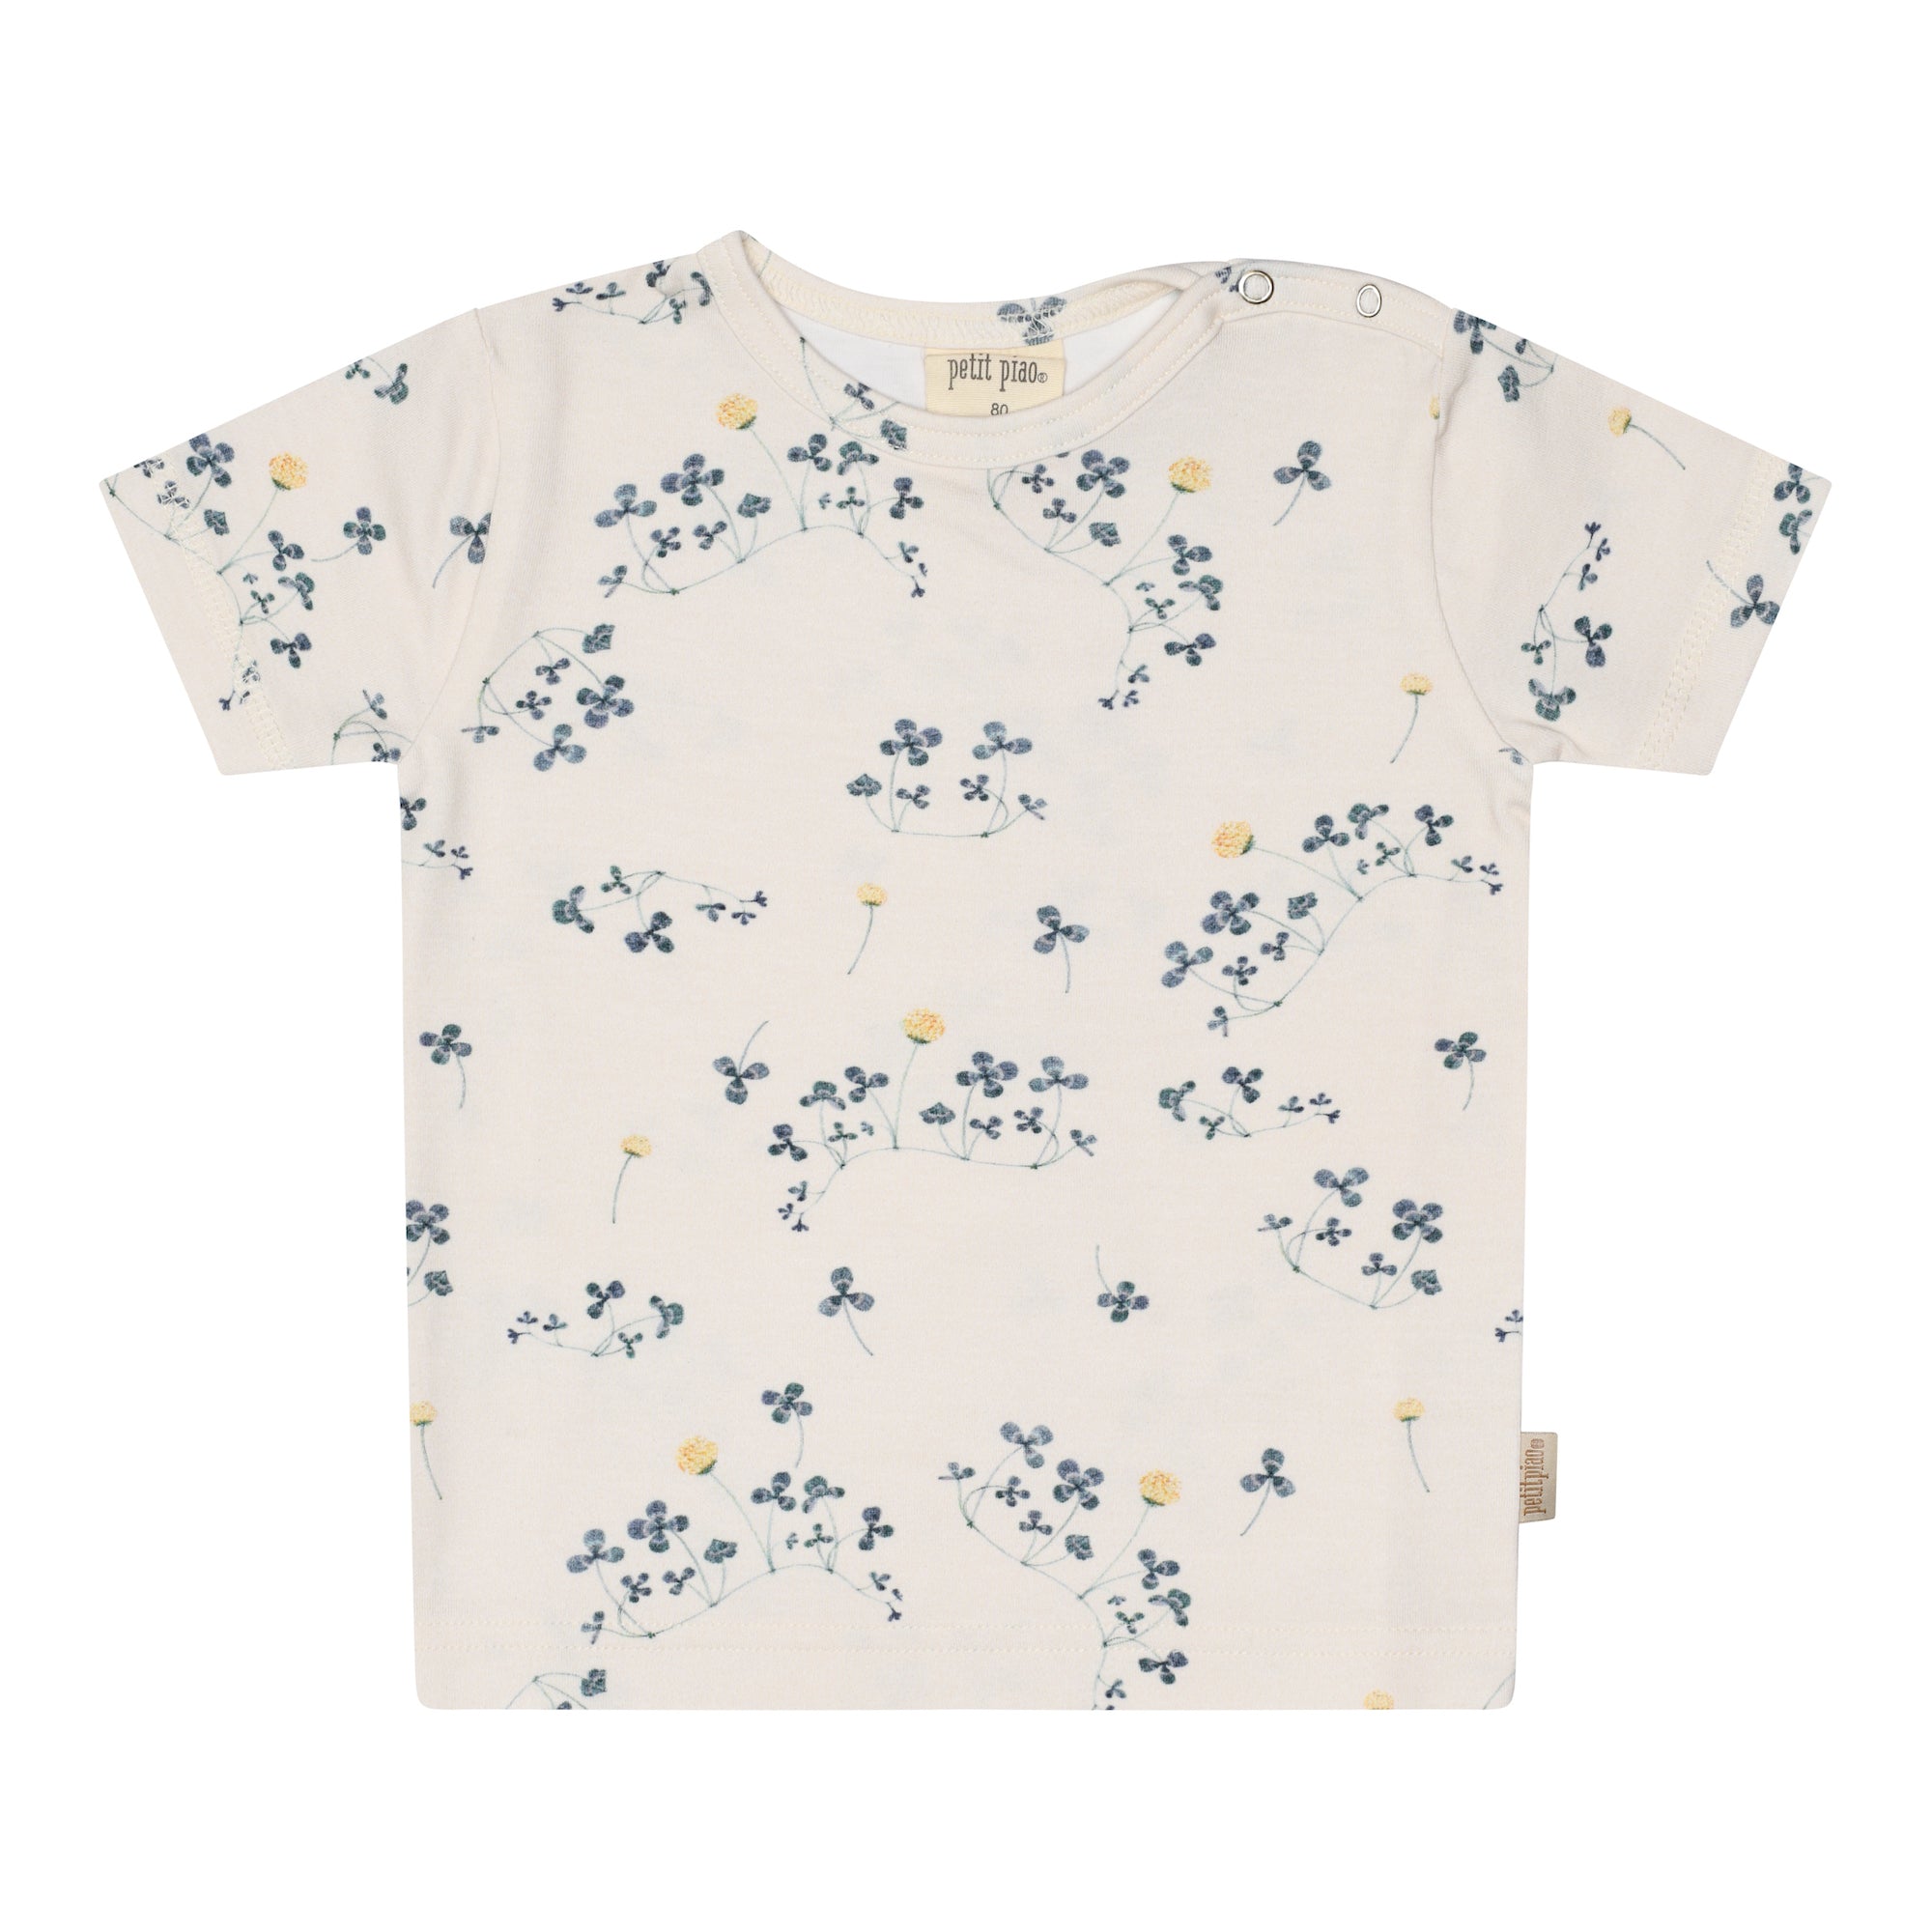 Petit Piao - T-shirt SS Printed, PP205 - Clover